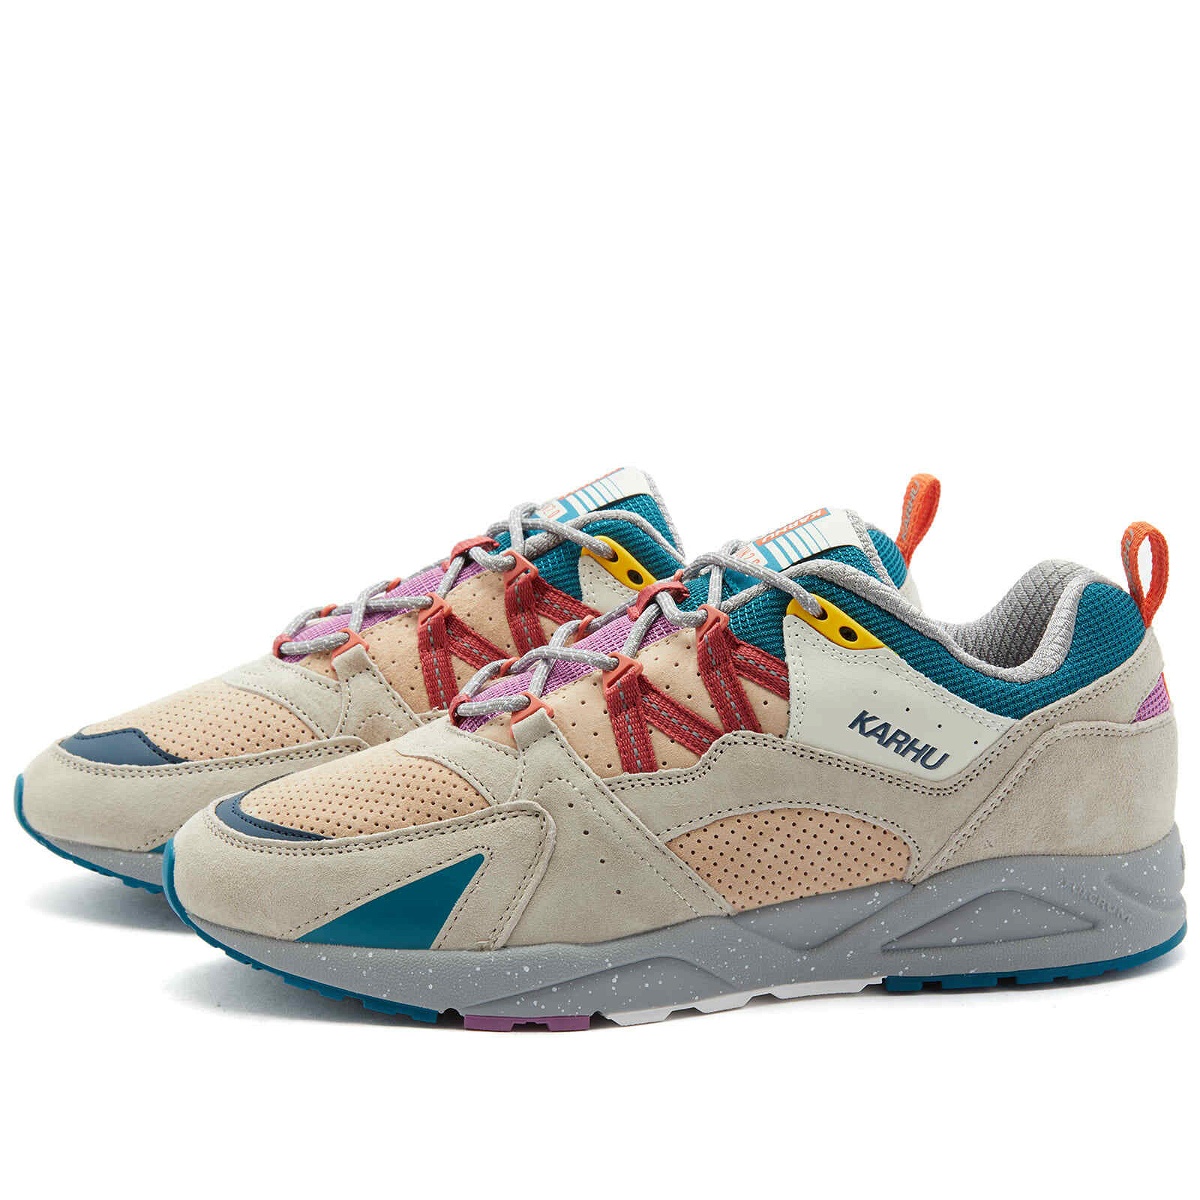 Photo: Karhu Men's Fusion 2.0 Sneakers in Silver Lining/Mineral Red